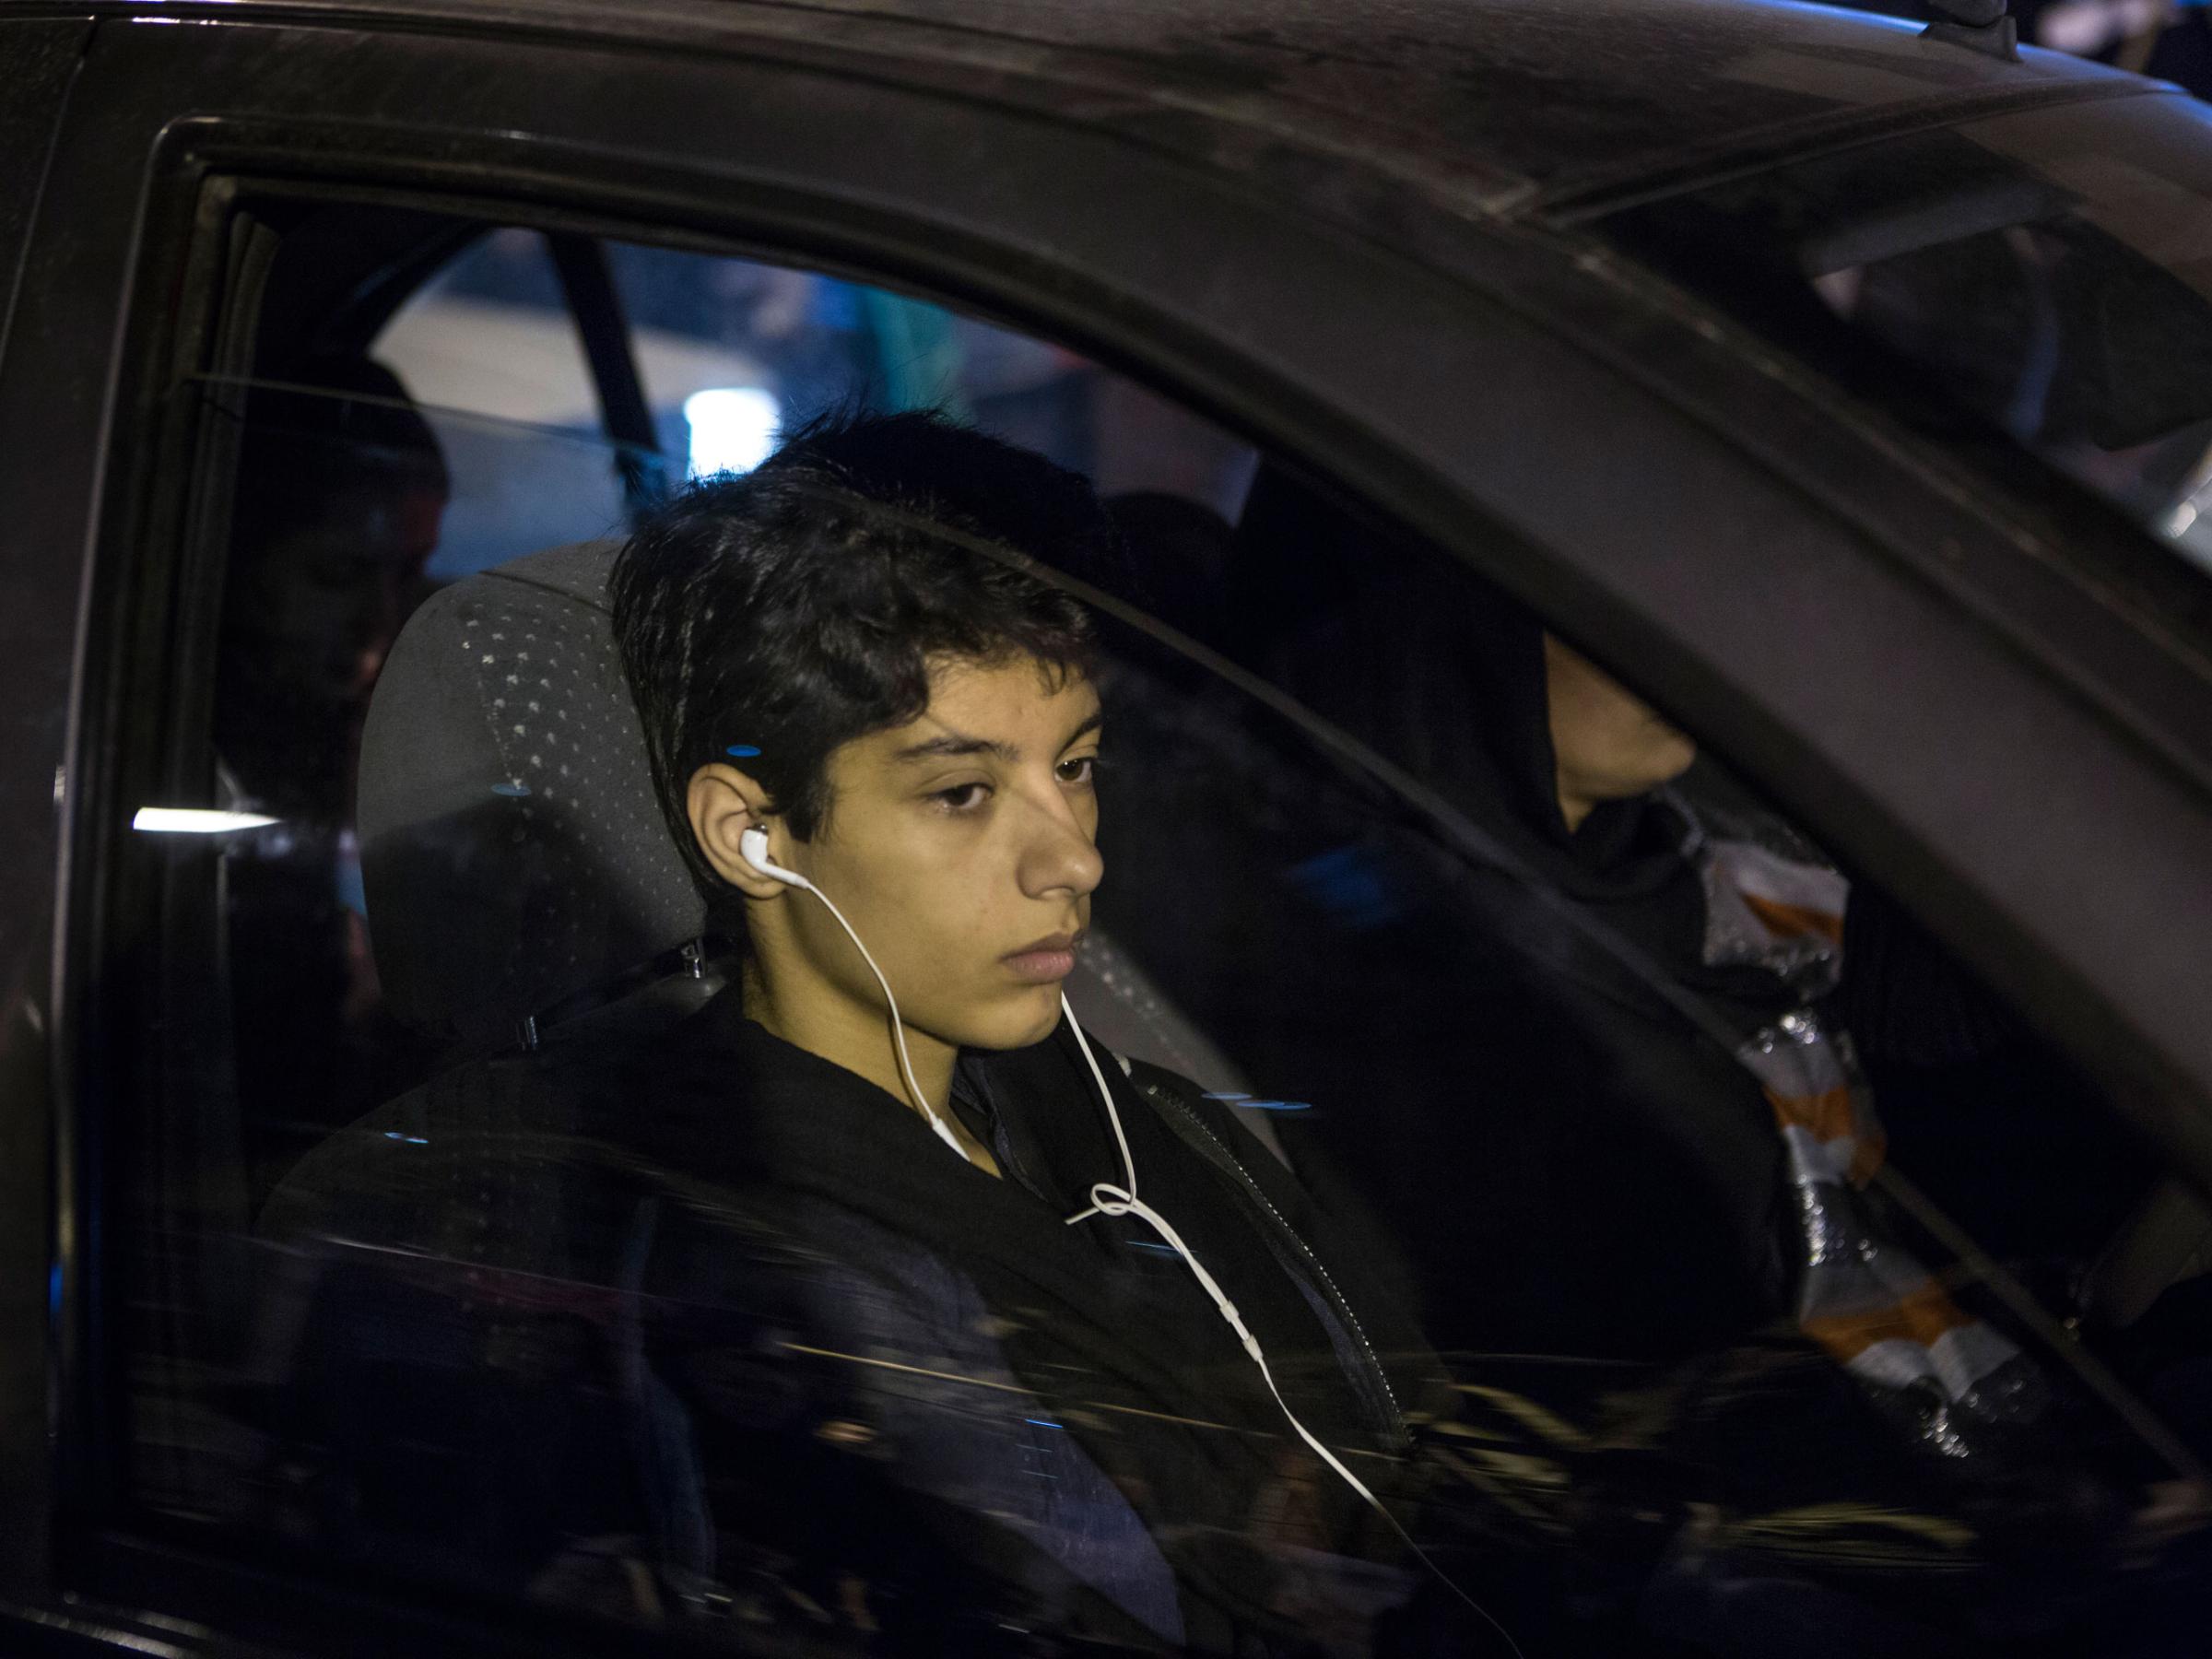 A young man in a car sitting next to his mother, in Iran the use of headsets and mobile phones is wide spread.